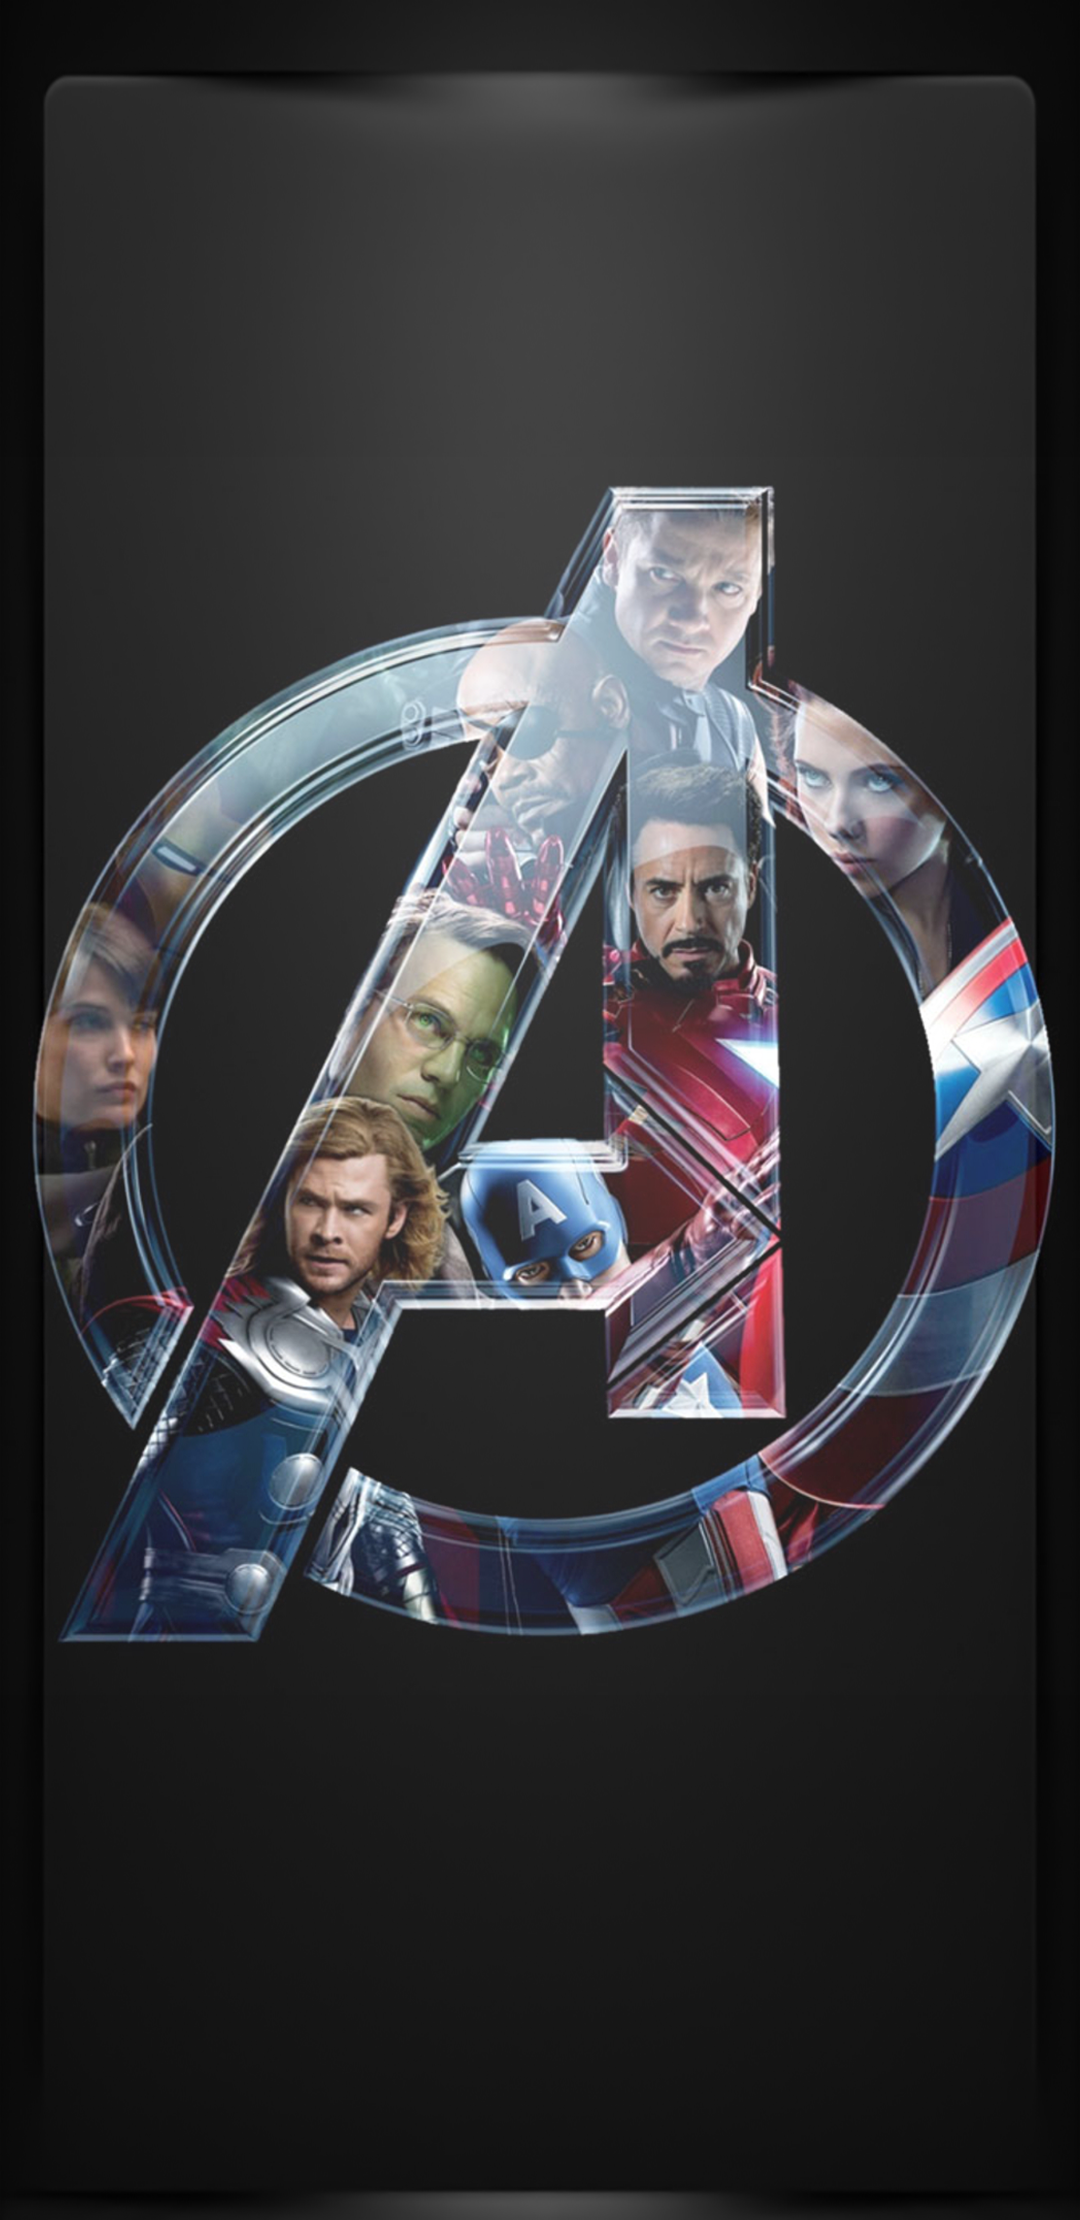 1080x1920 avengers, hd, logo, superheroes for Iphone 6, 7, 8 wallpaper -  Coolwallpapers.me!